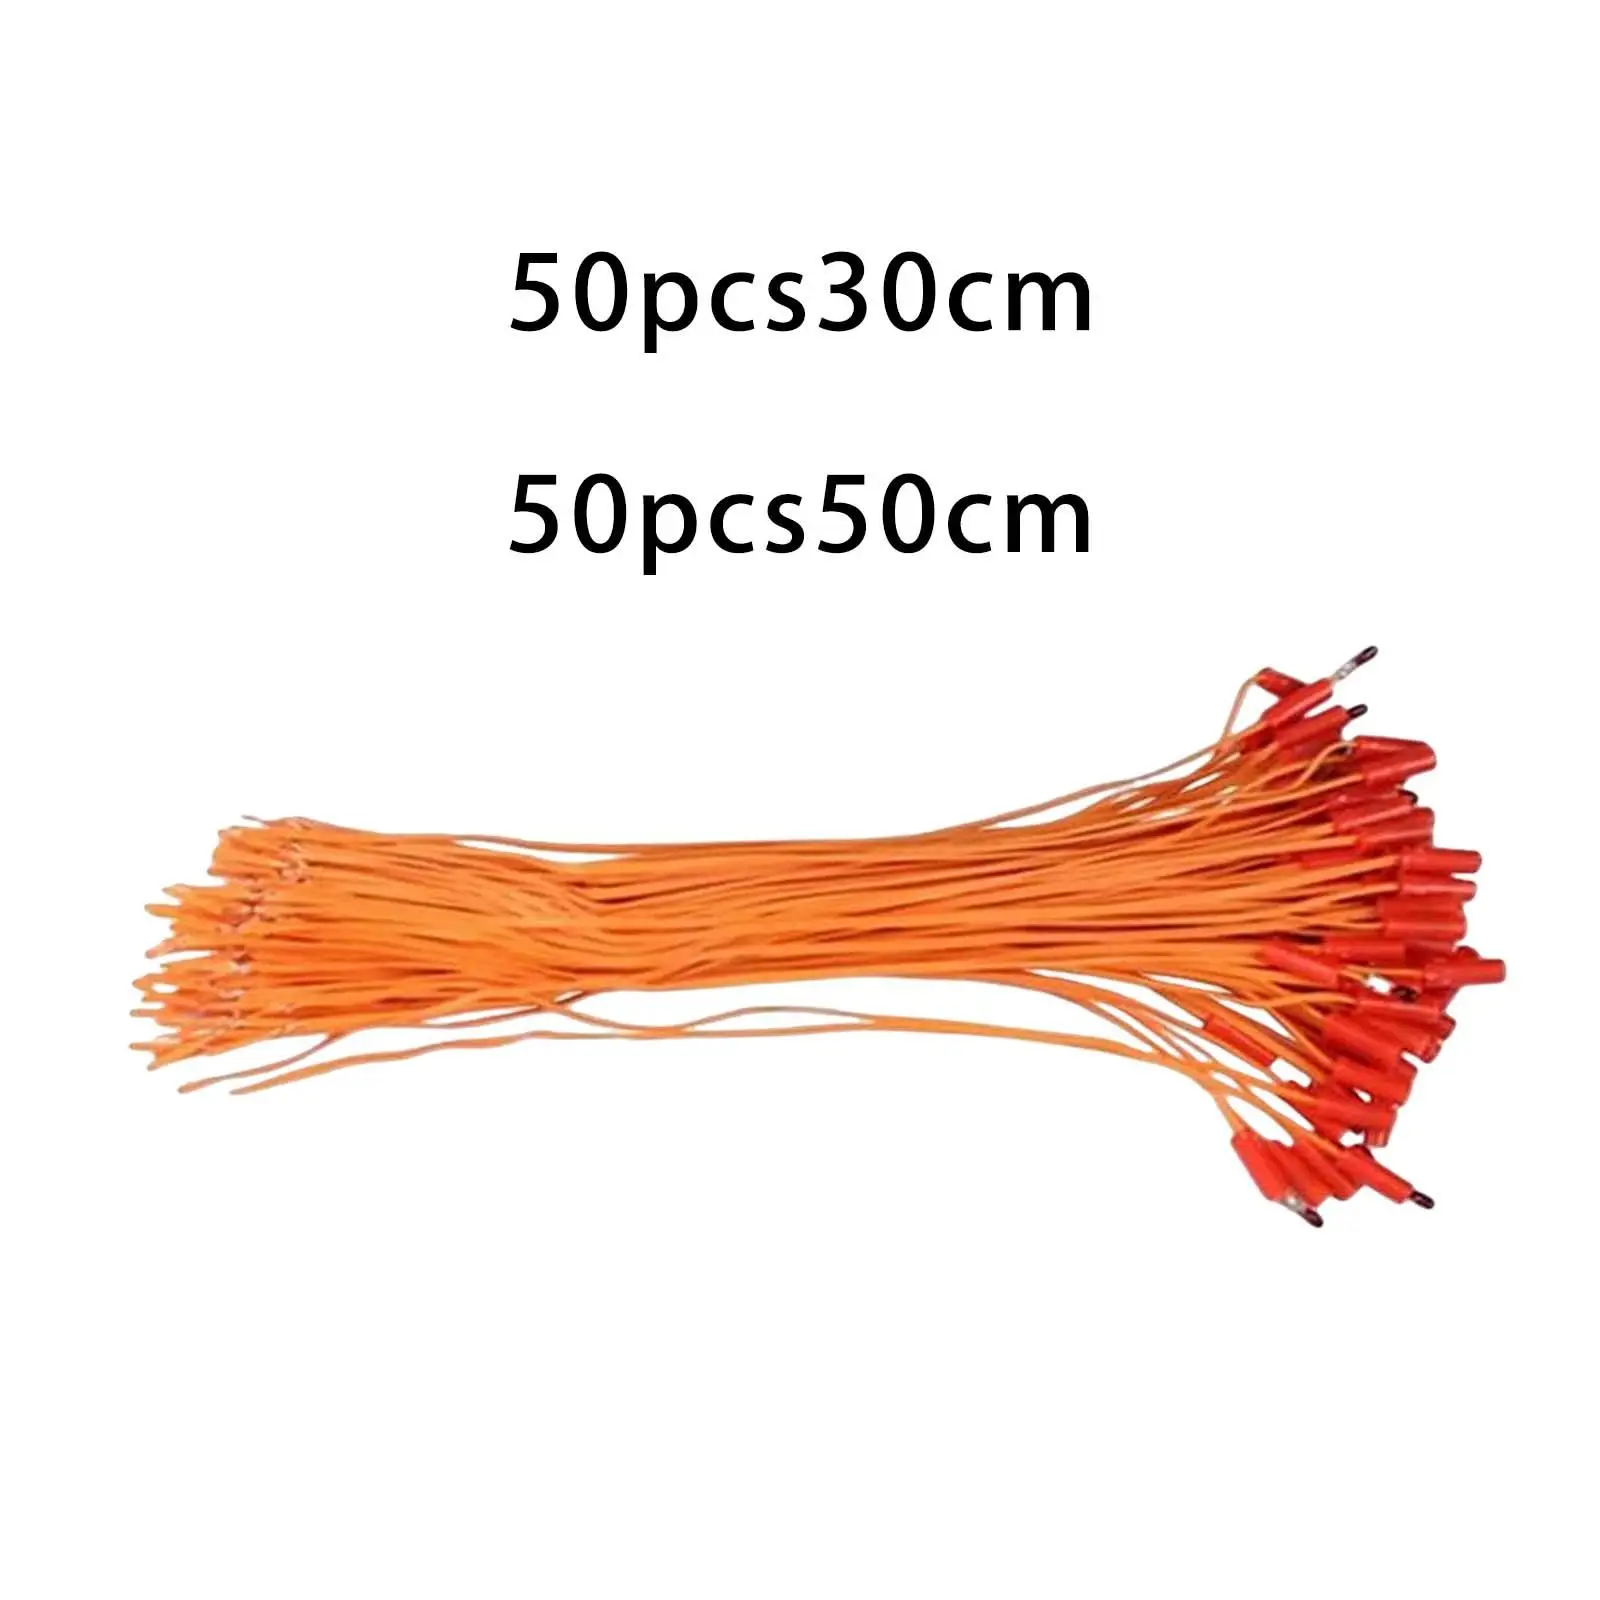 50 Pieces Copper Hookup Wire Fuse Ignition Firing System Electrical for Birthday Portable